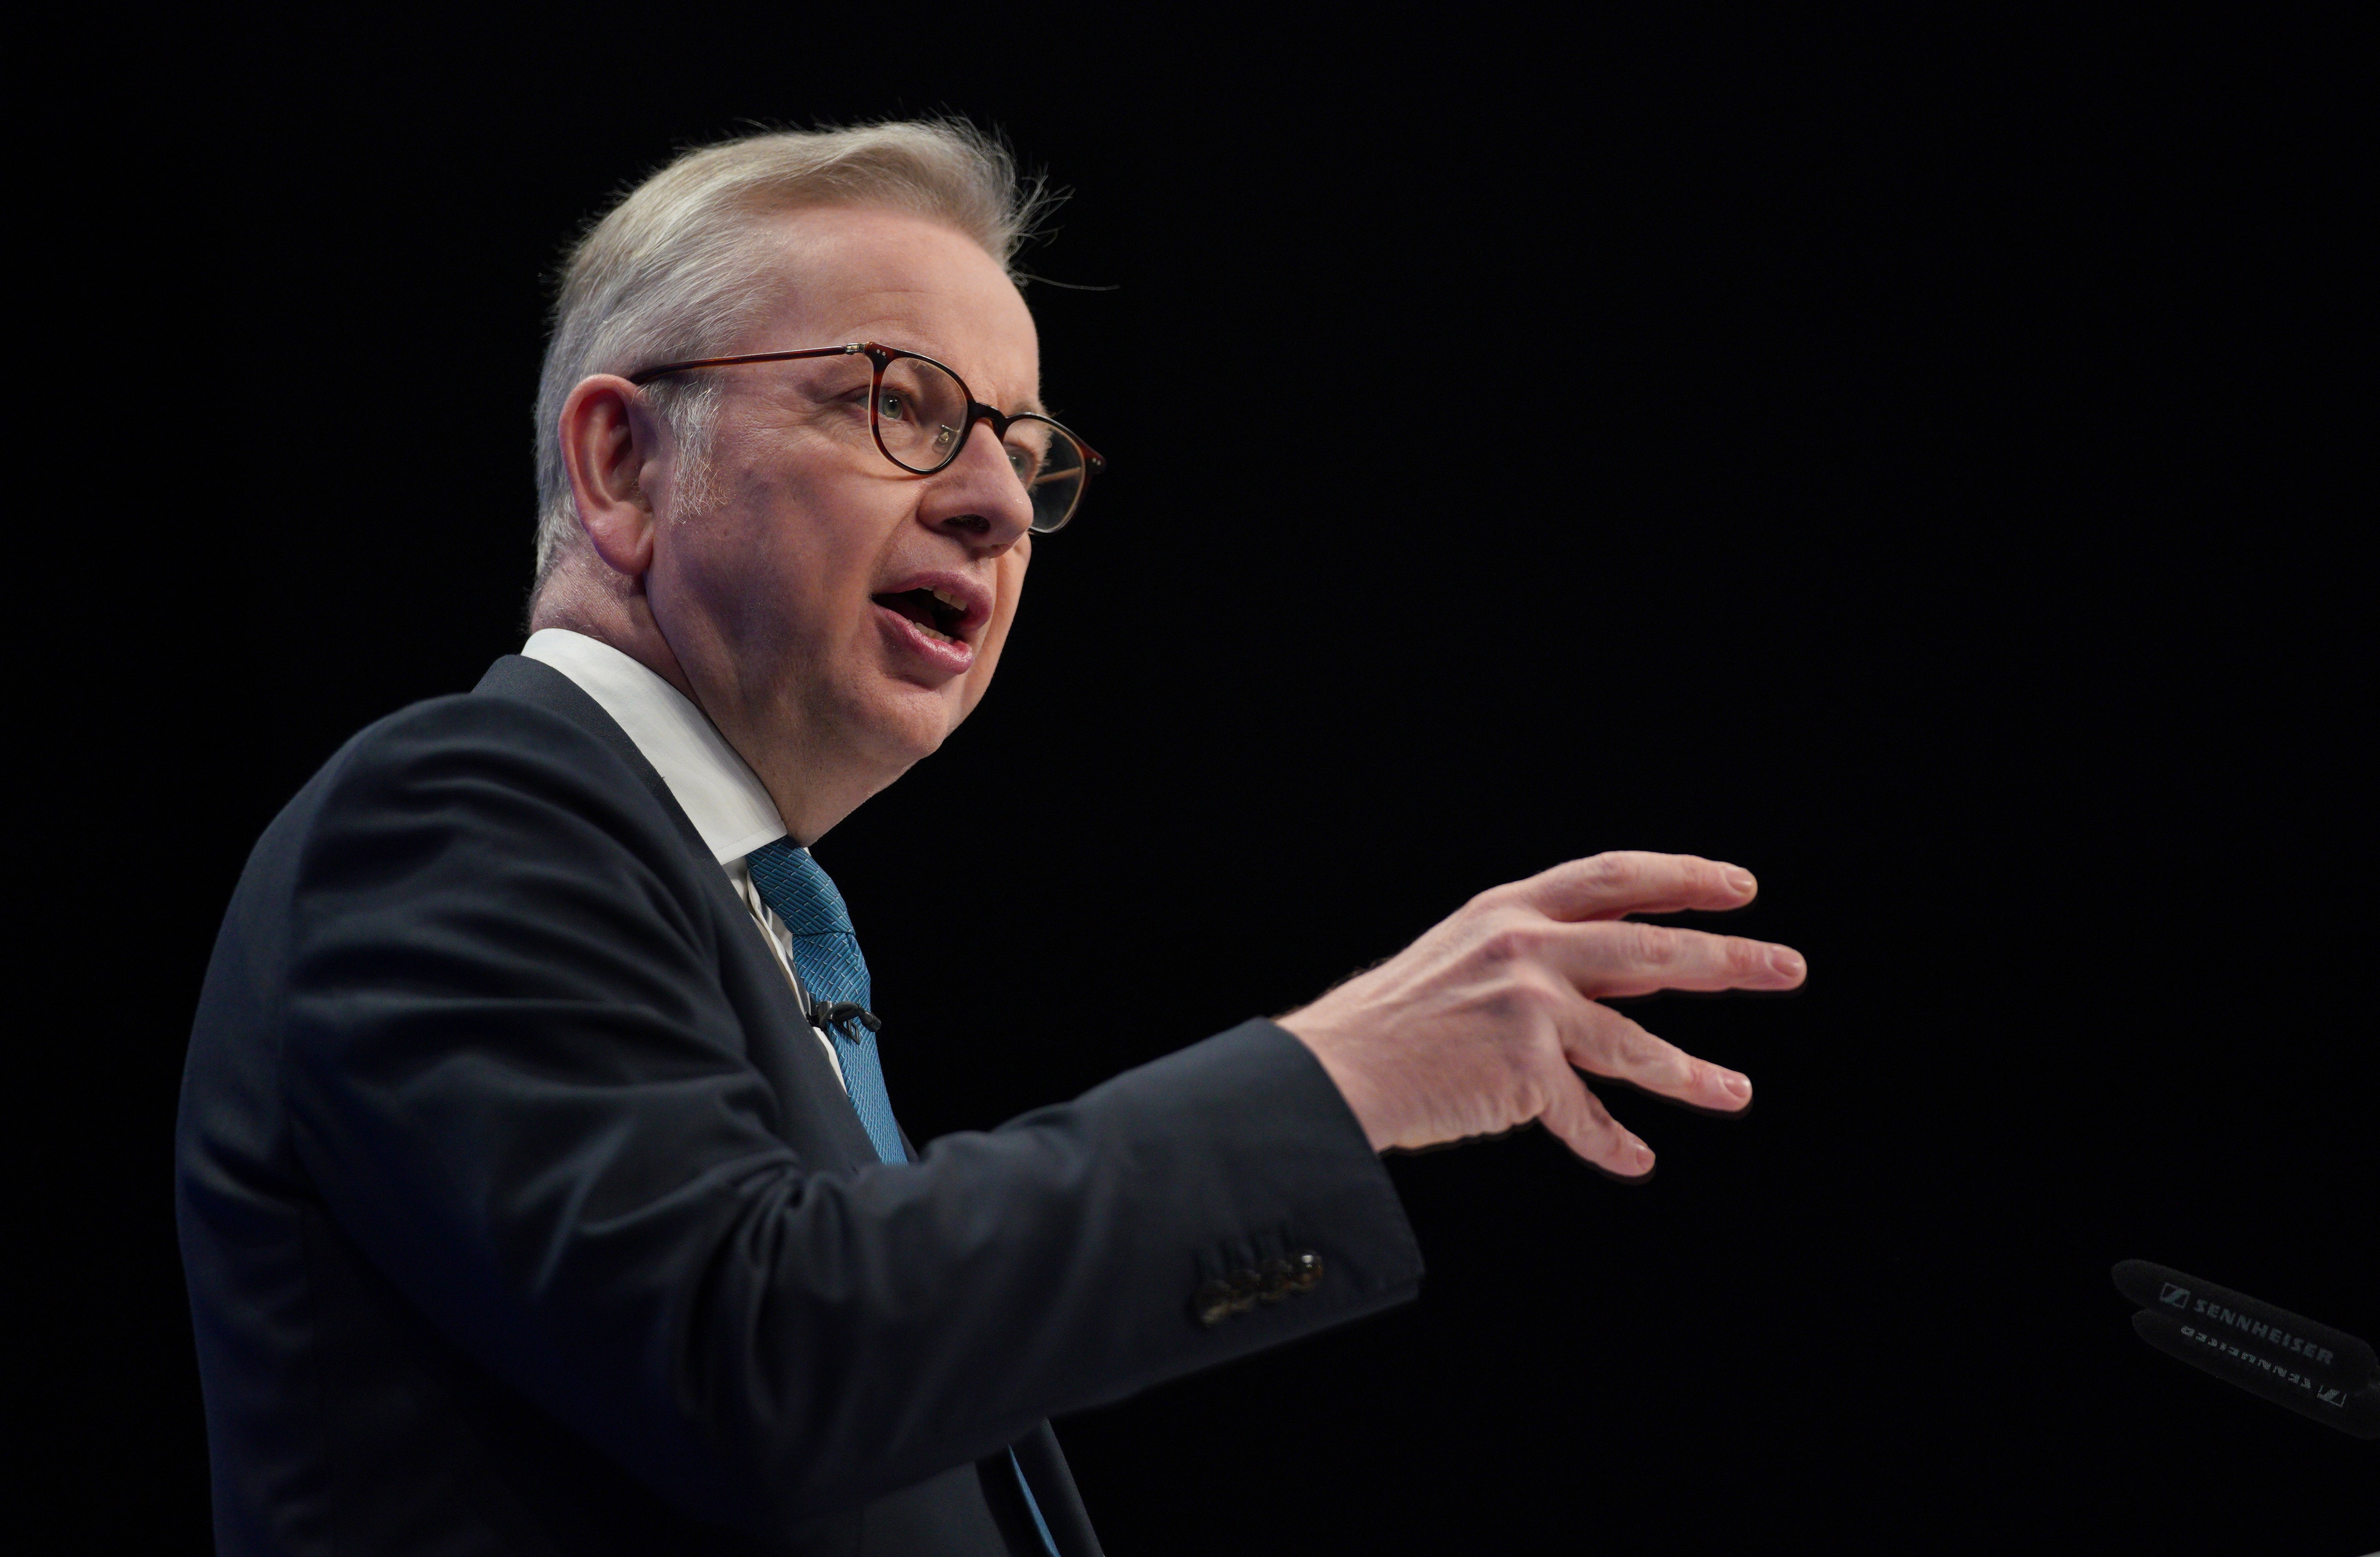 Michael Gove said it was ‘long past time’ to fix the crisis